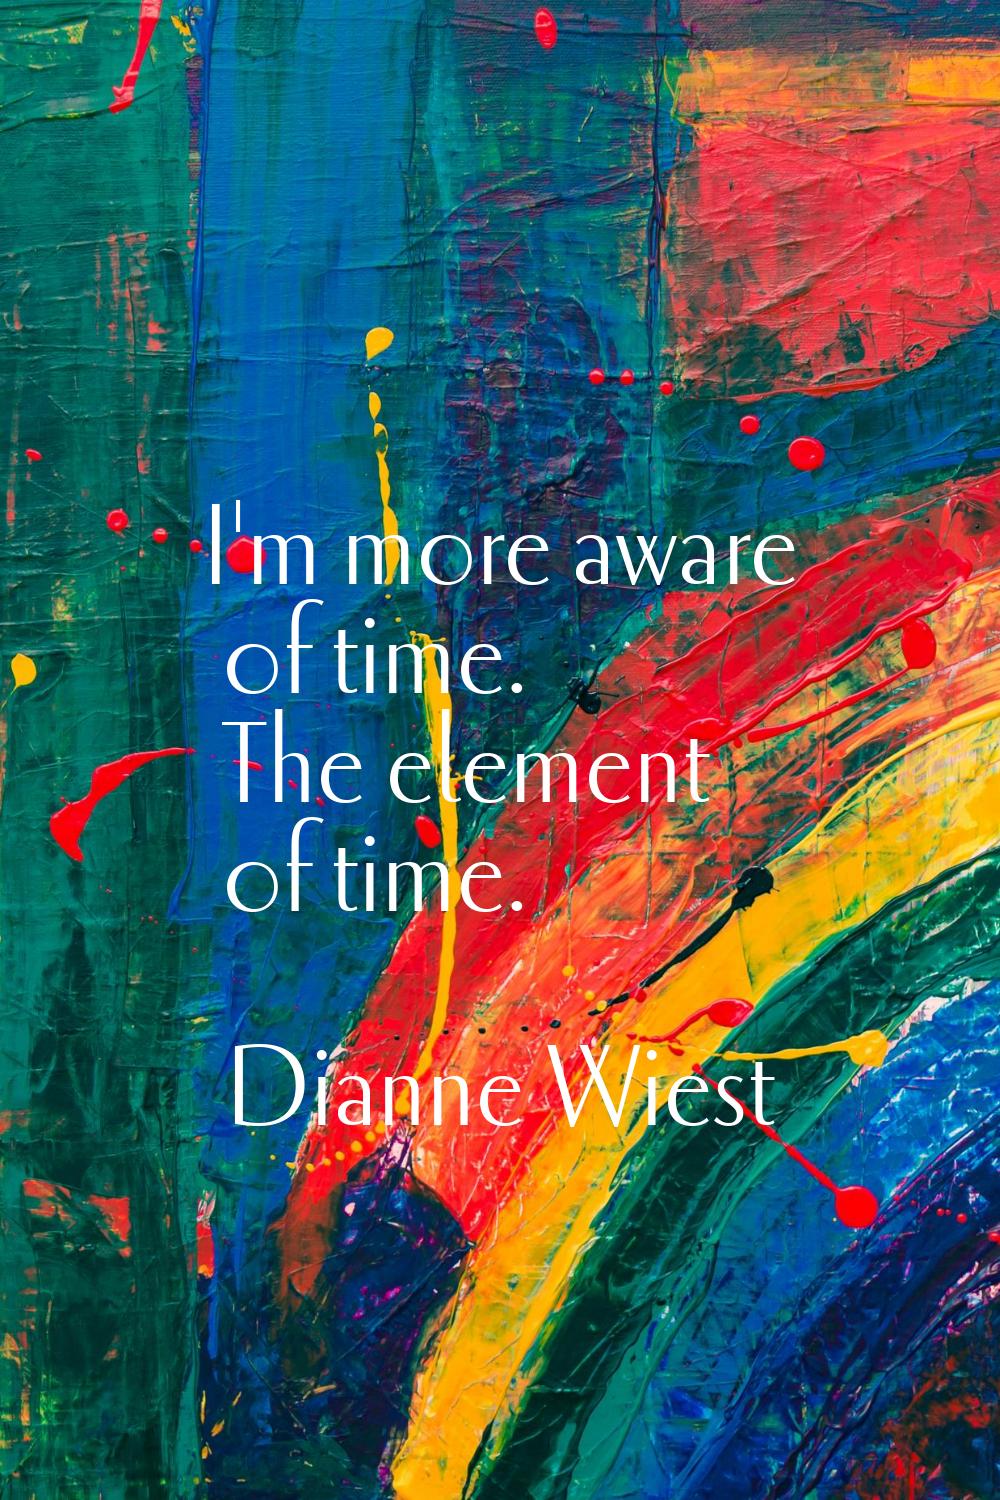 I'm more aware of time. The element of time.